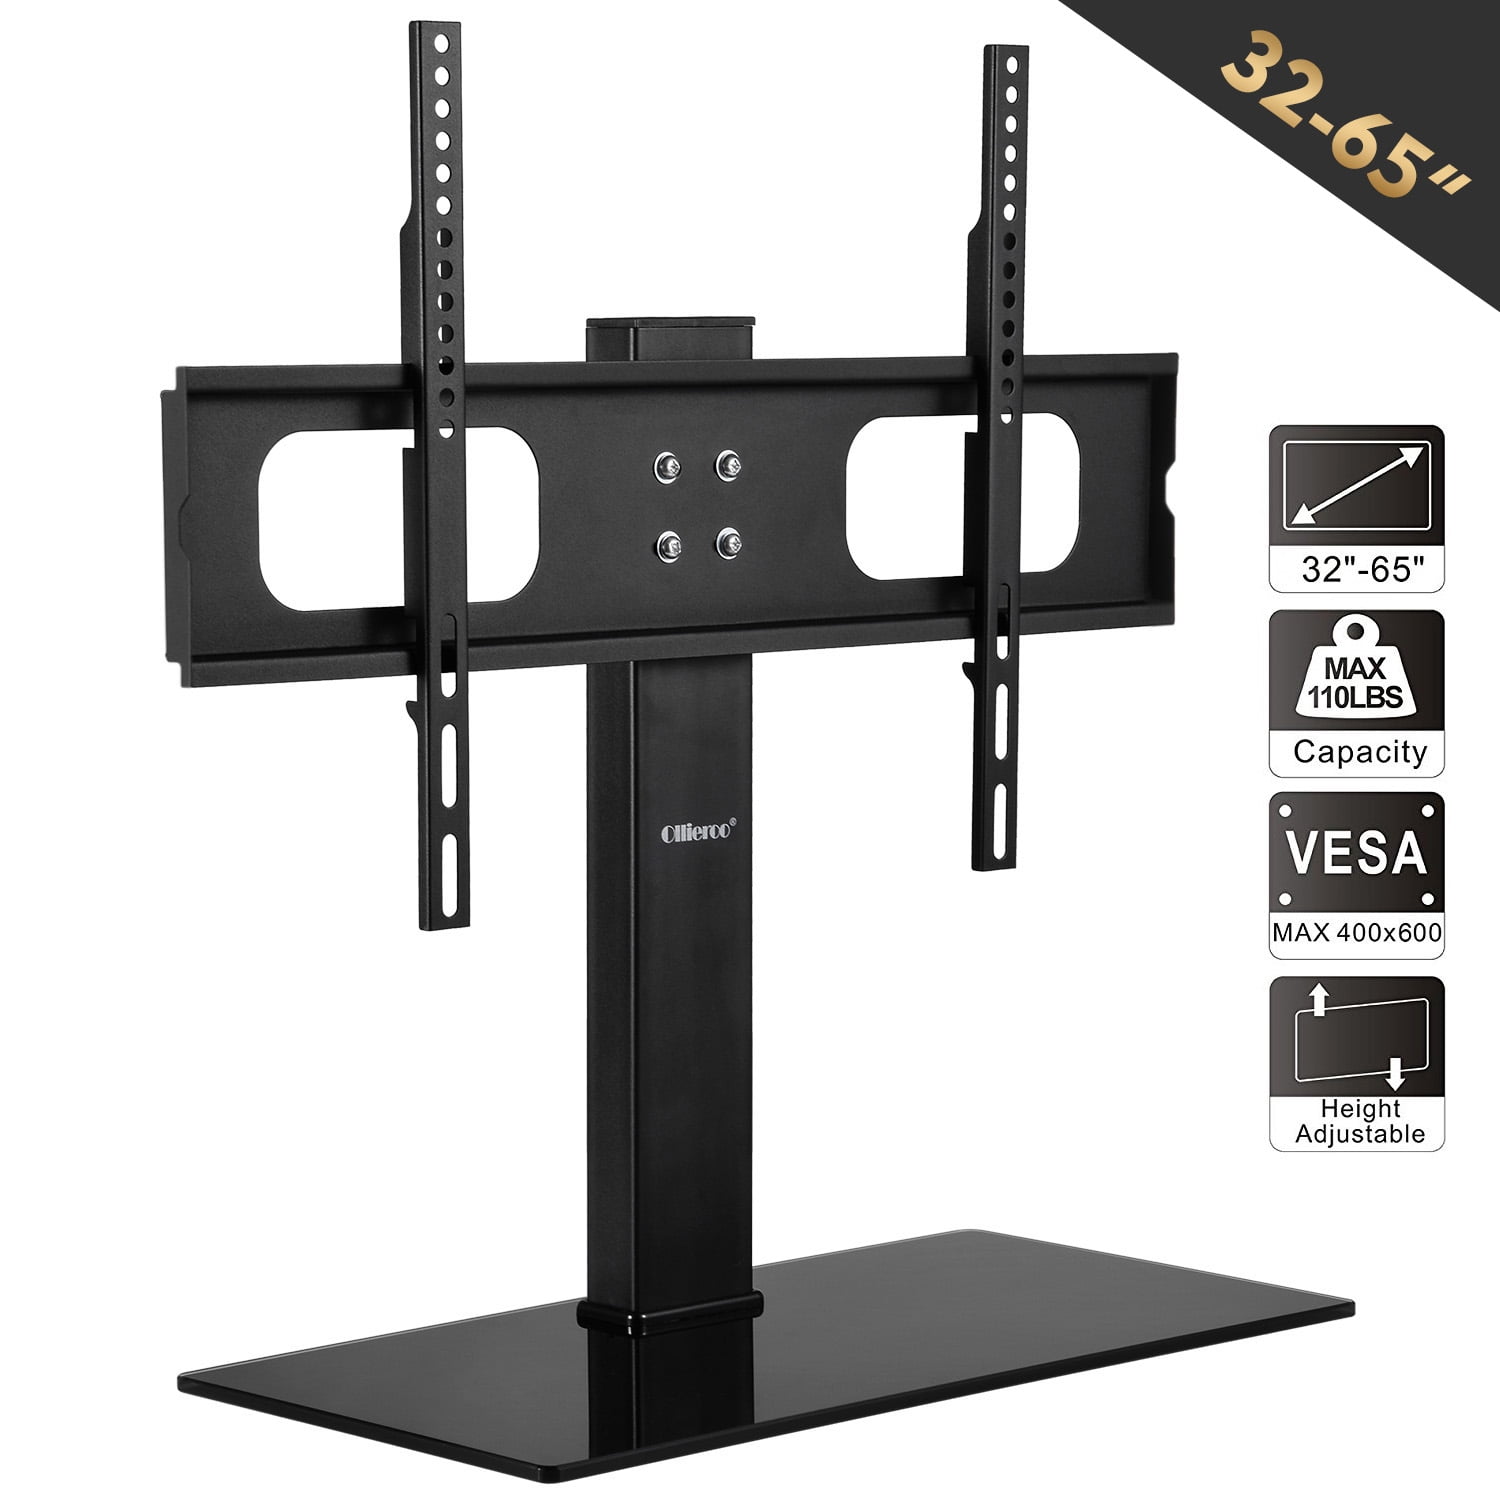 Universal TV Stand/Base Tabletop TV Stand with Wall Mount for 32 to 65 inch 4 up 